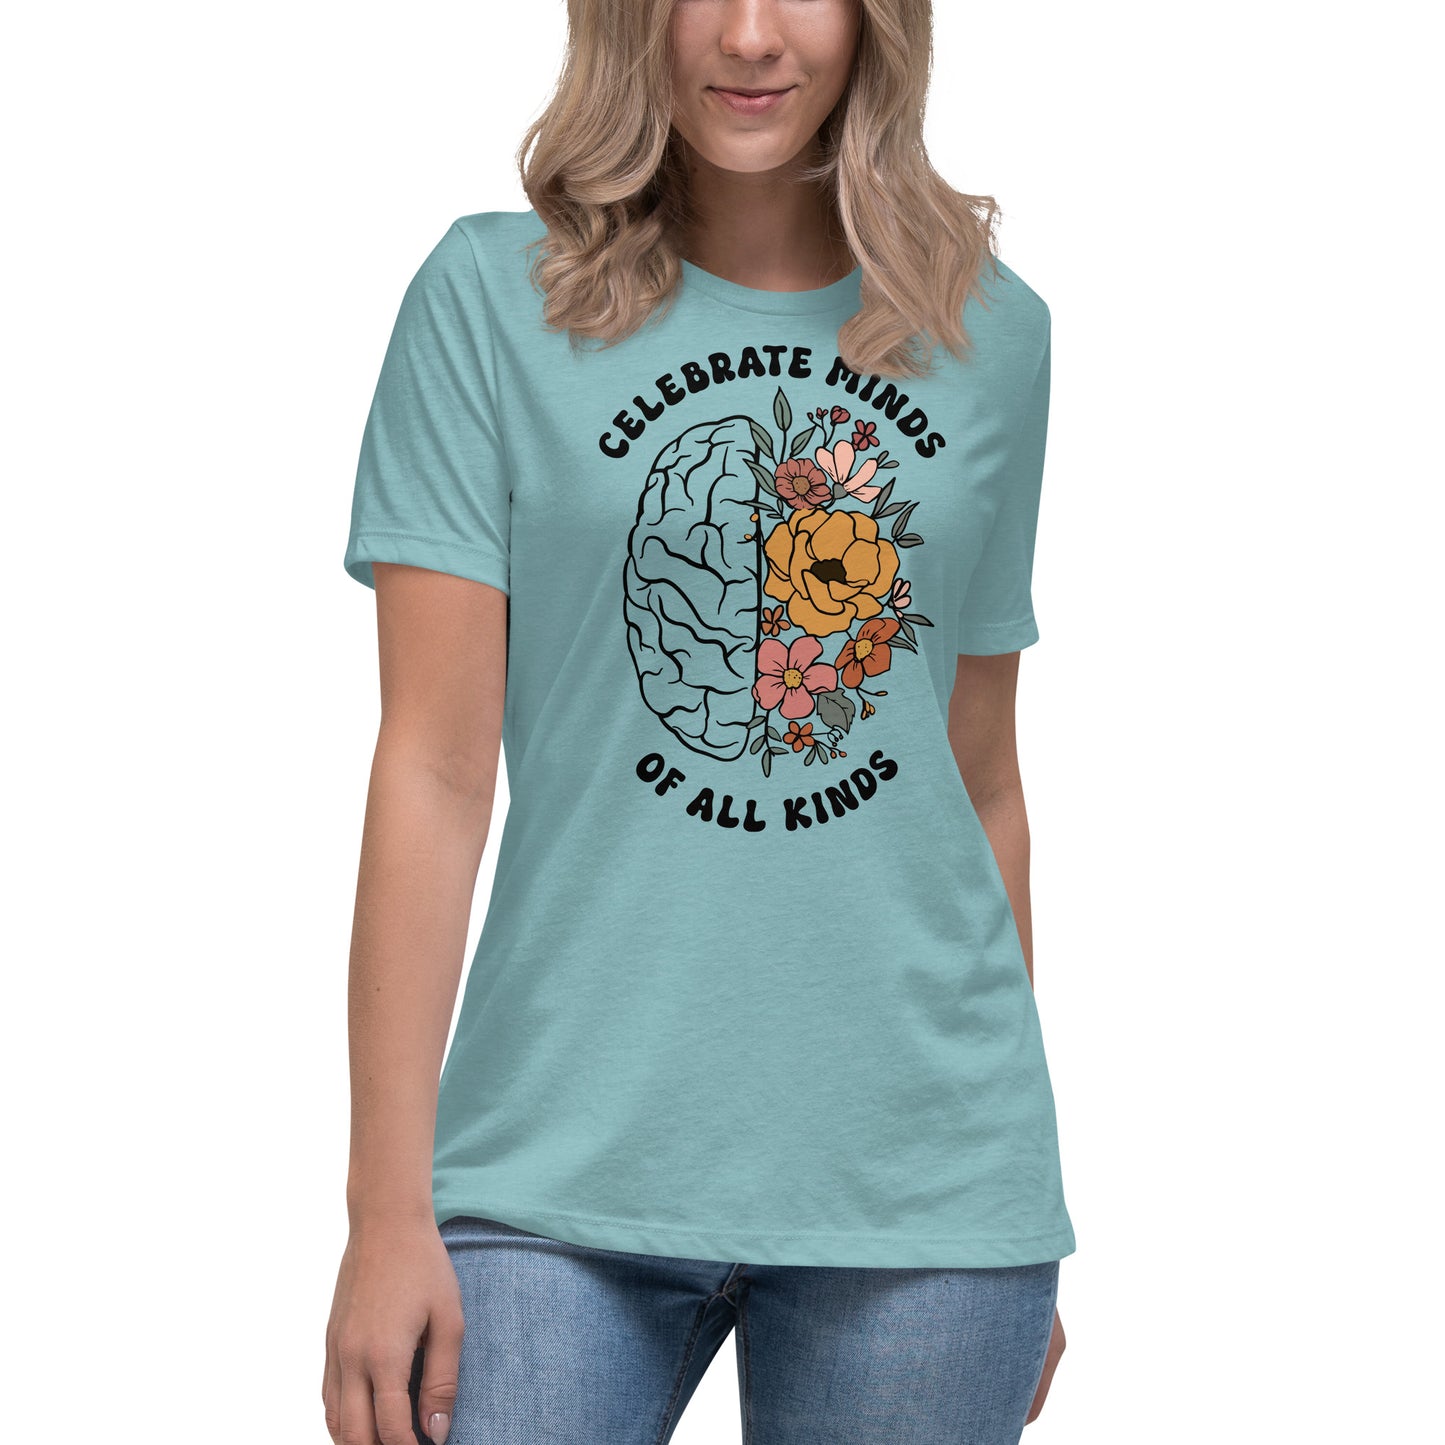 Celebrate Minds of All Kinds - Women’s T-shirt